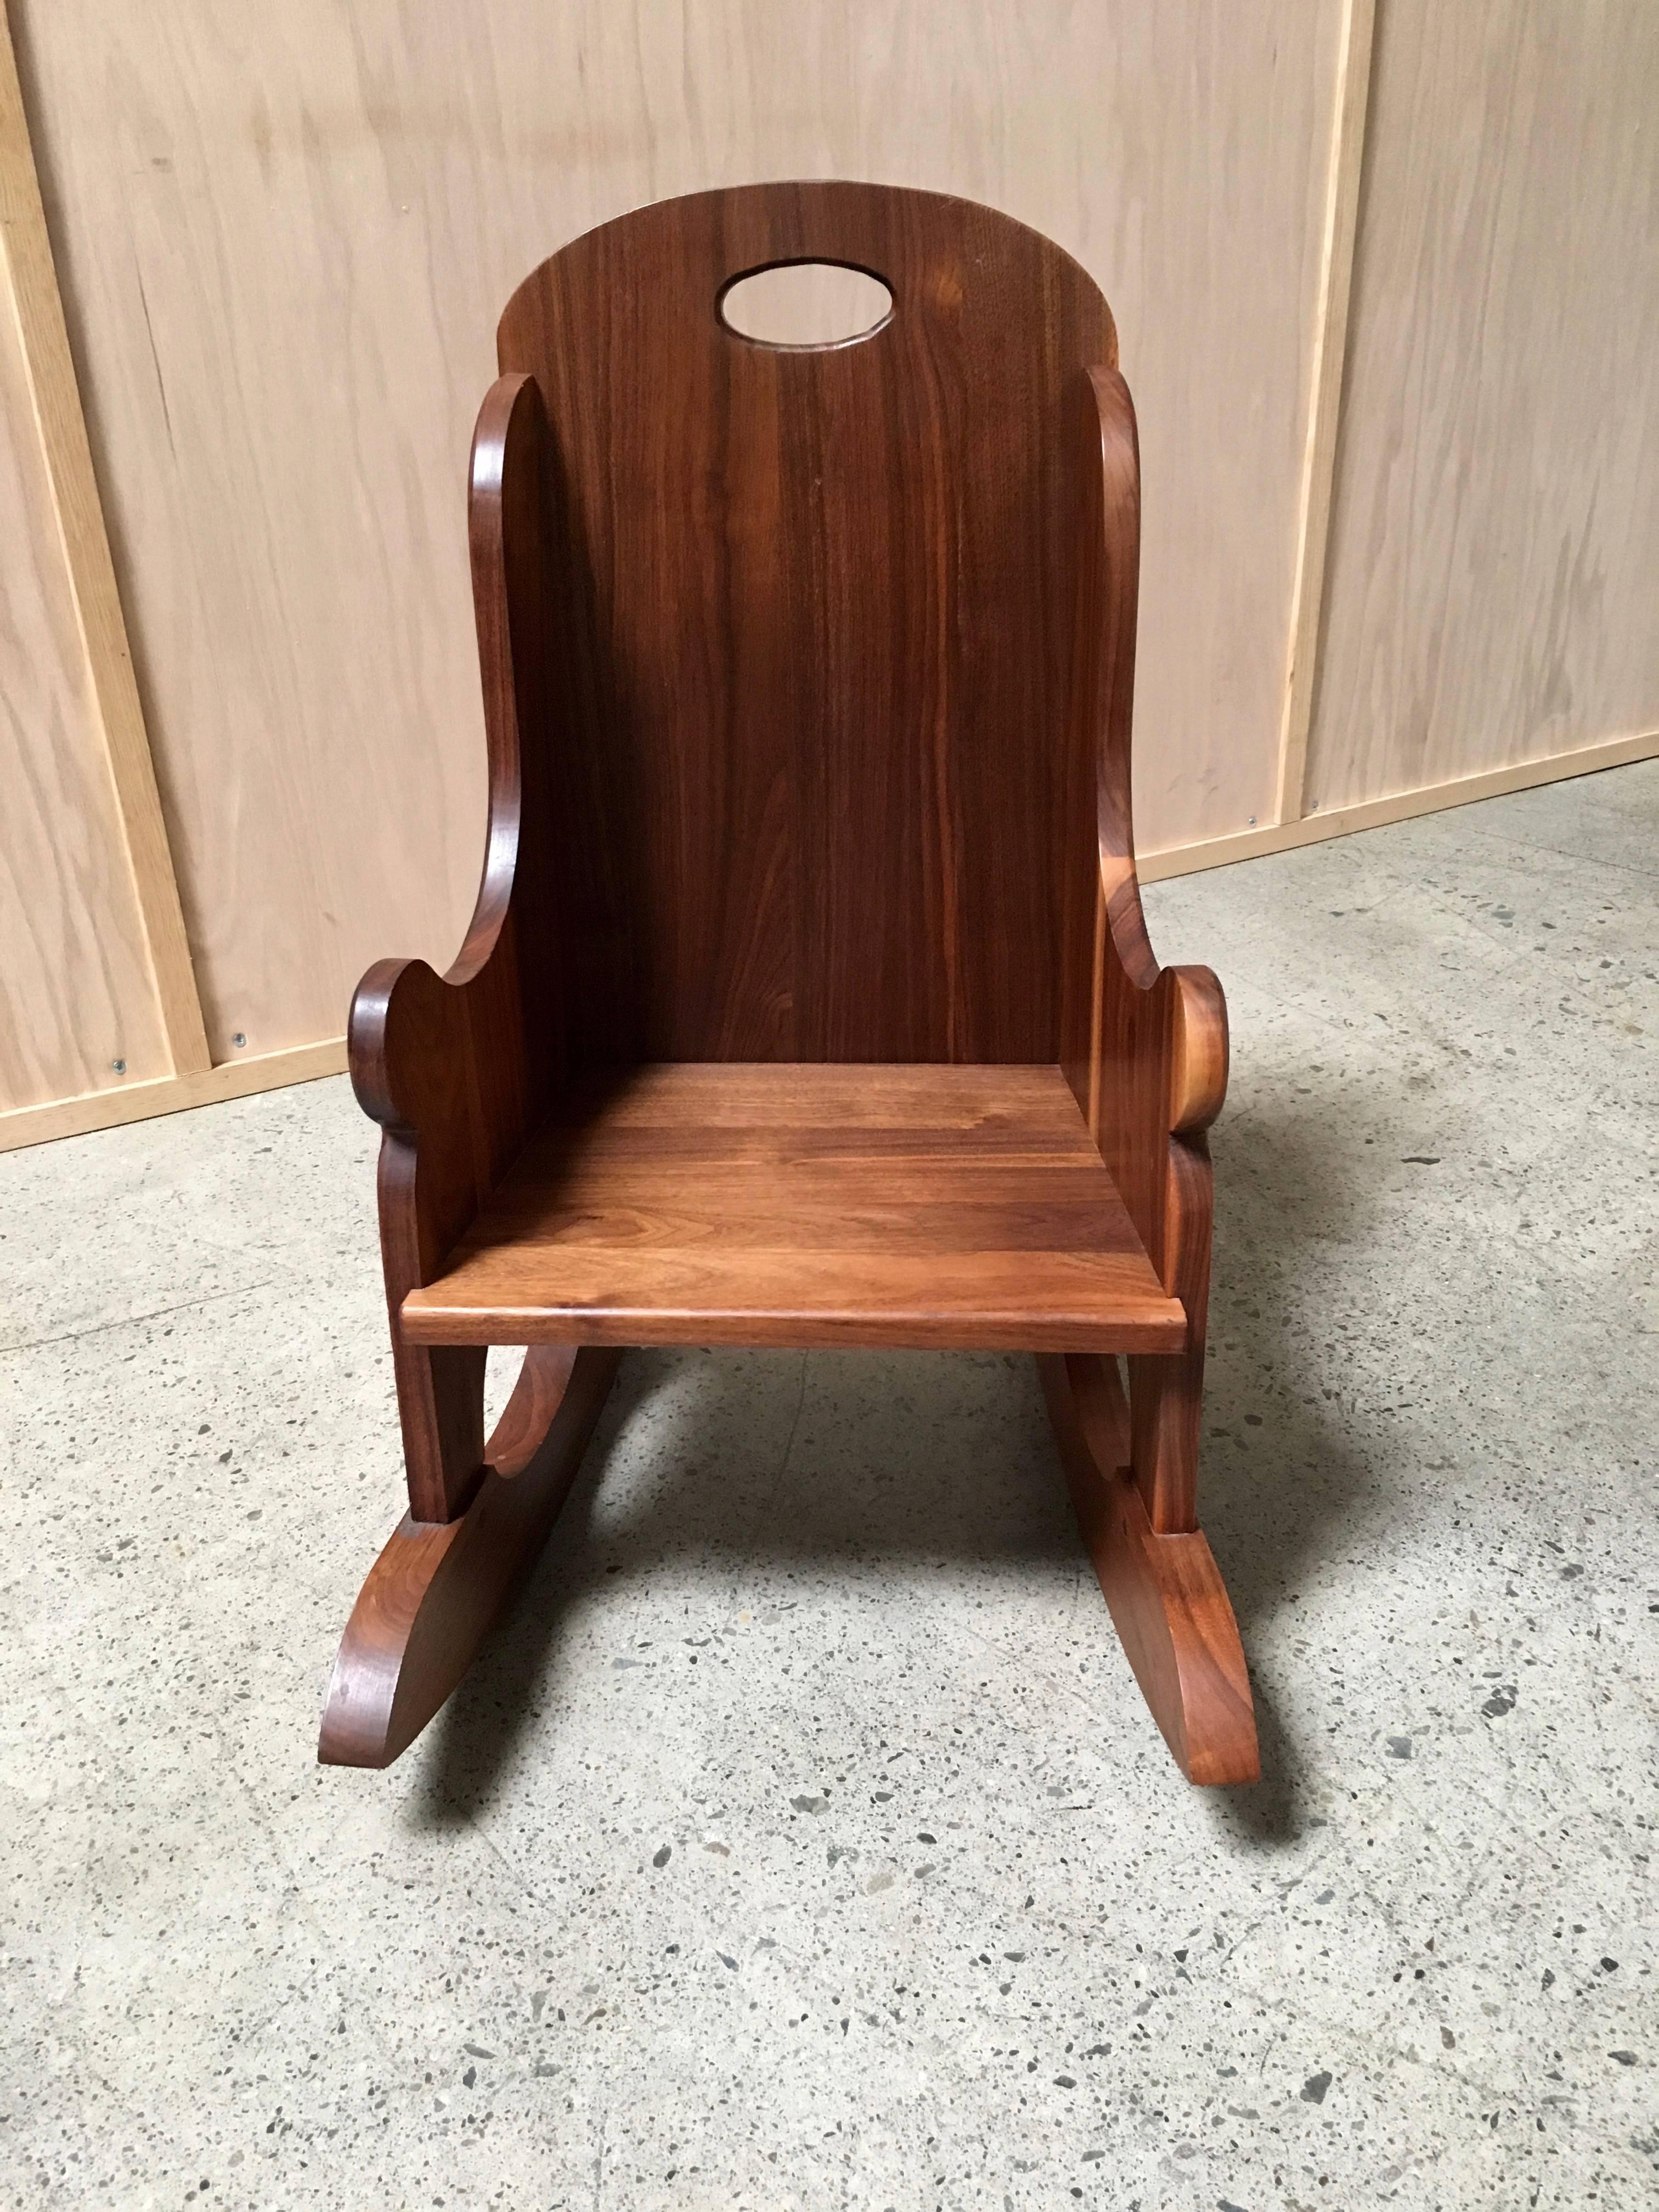 moving wooden chair